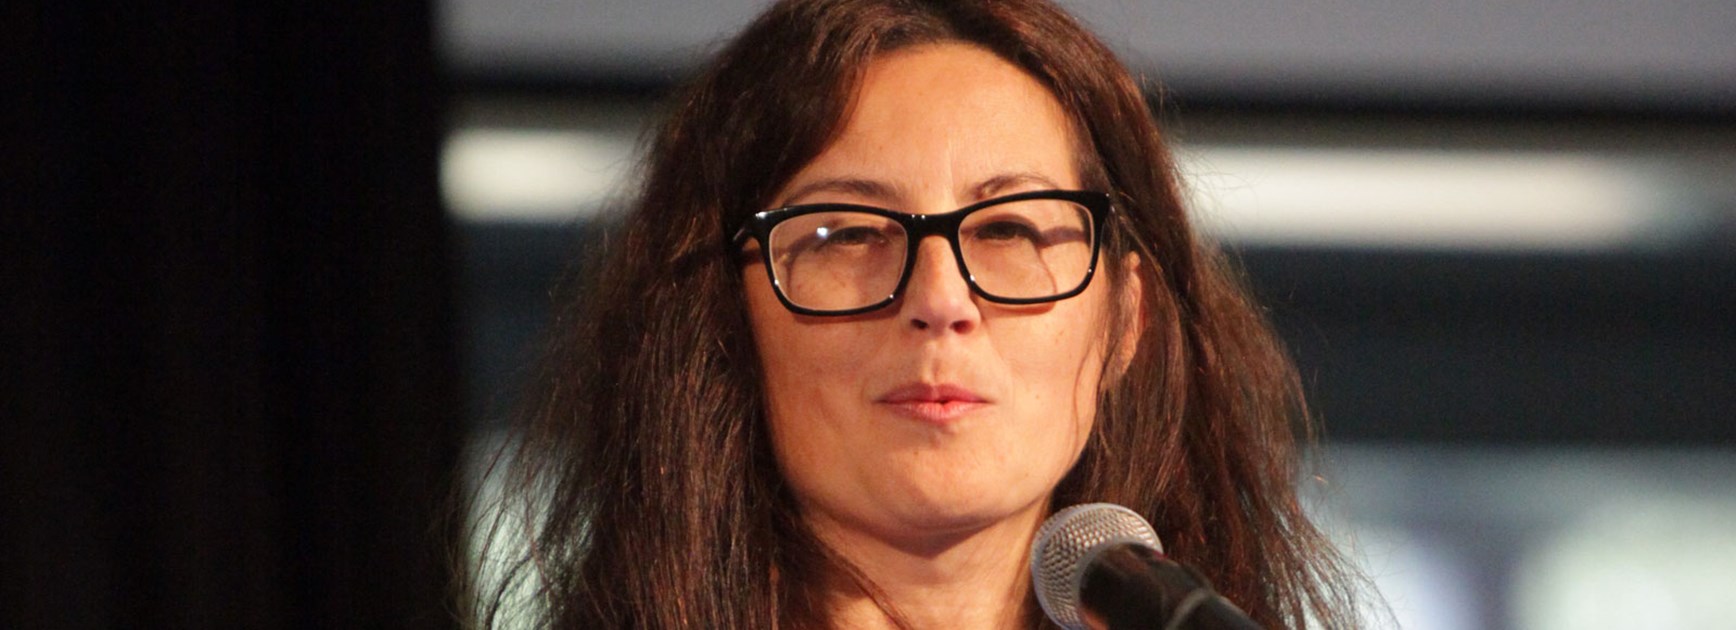 Marina Go will have been chairwoman of the Wests Tigers for six months when the Tigers begin their 2015 campaign against the Gold Coast Titans.